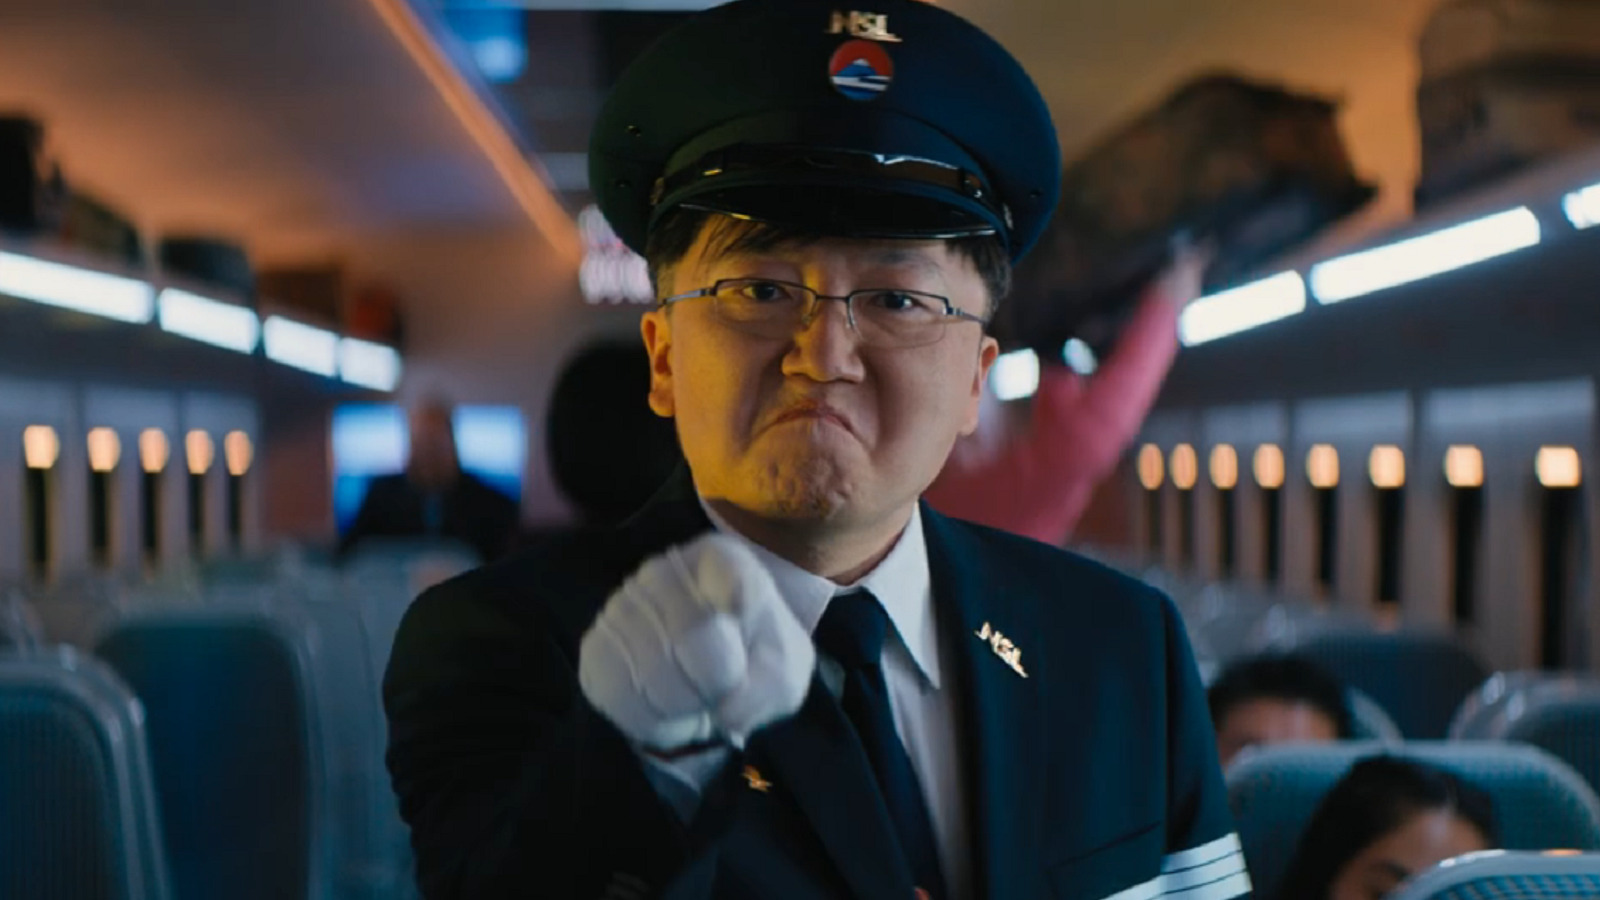 Why The Conductor From Bullet Train Looks So Familiar To Heroes Fans